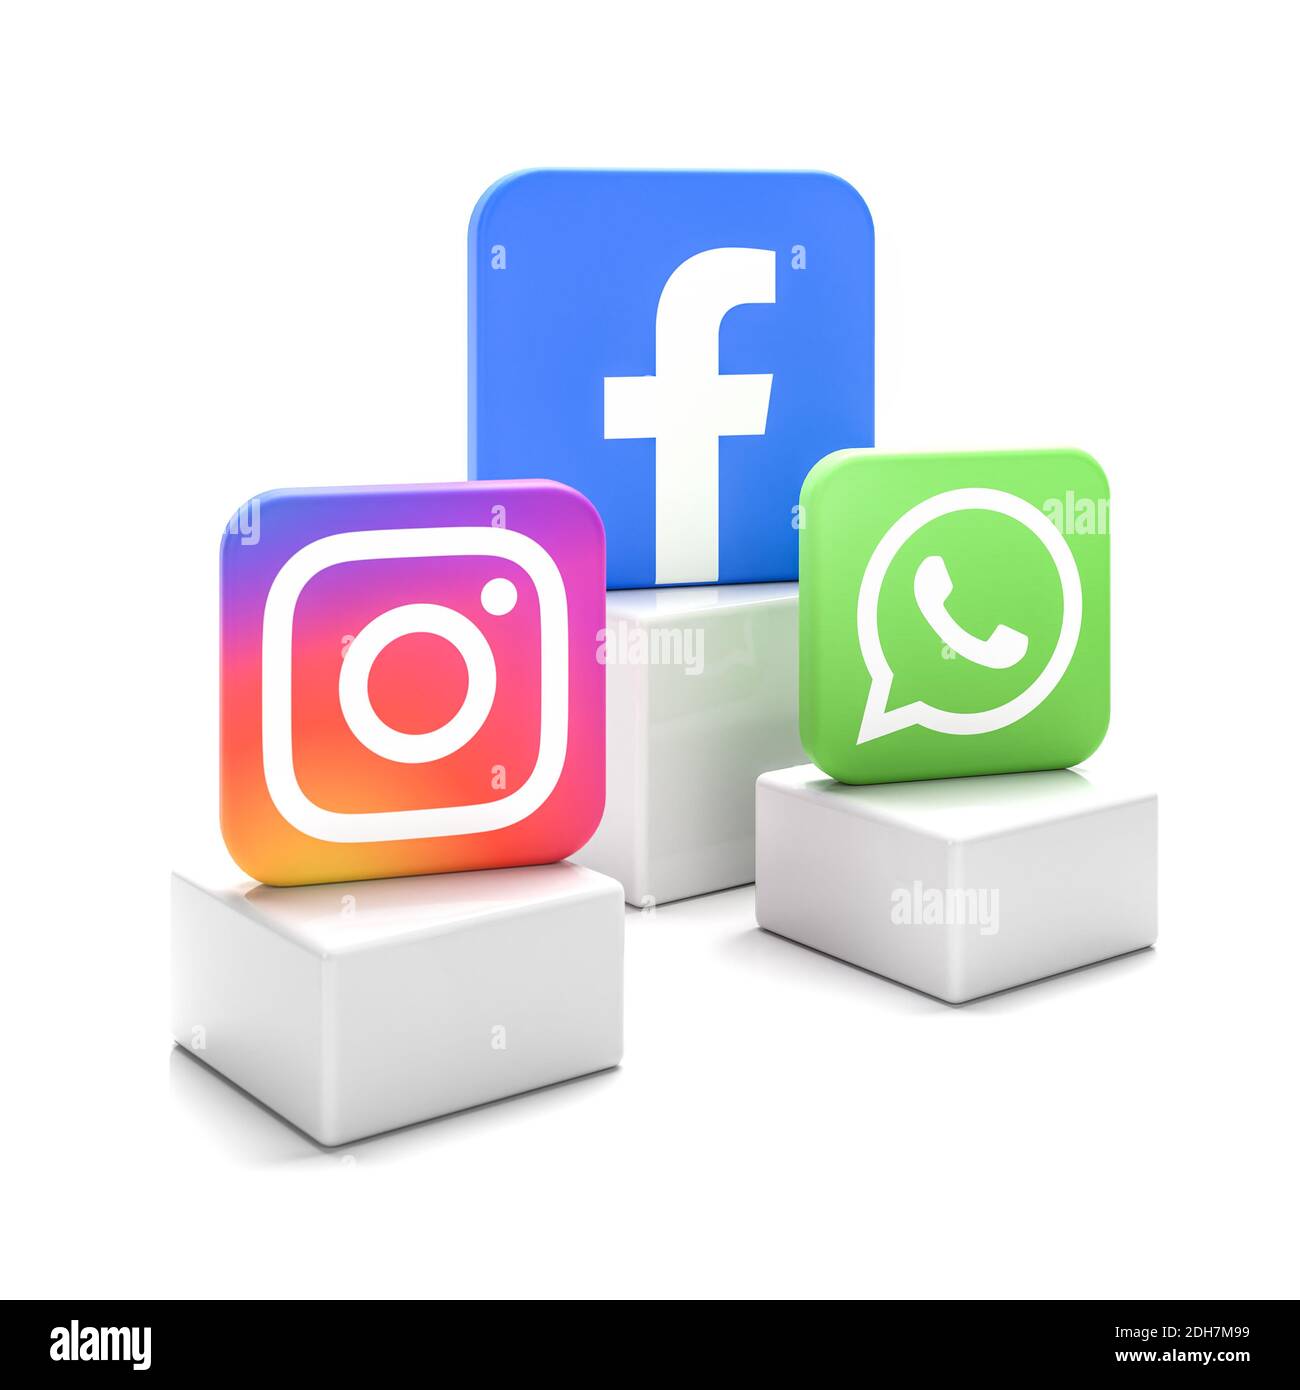 Logos of the Social Media companies Facebook, Instagram and Whatsapp. Instagram and Whatsapp belong to the Facebook group, that is why Facebook is bei Stock Photo